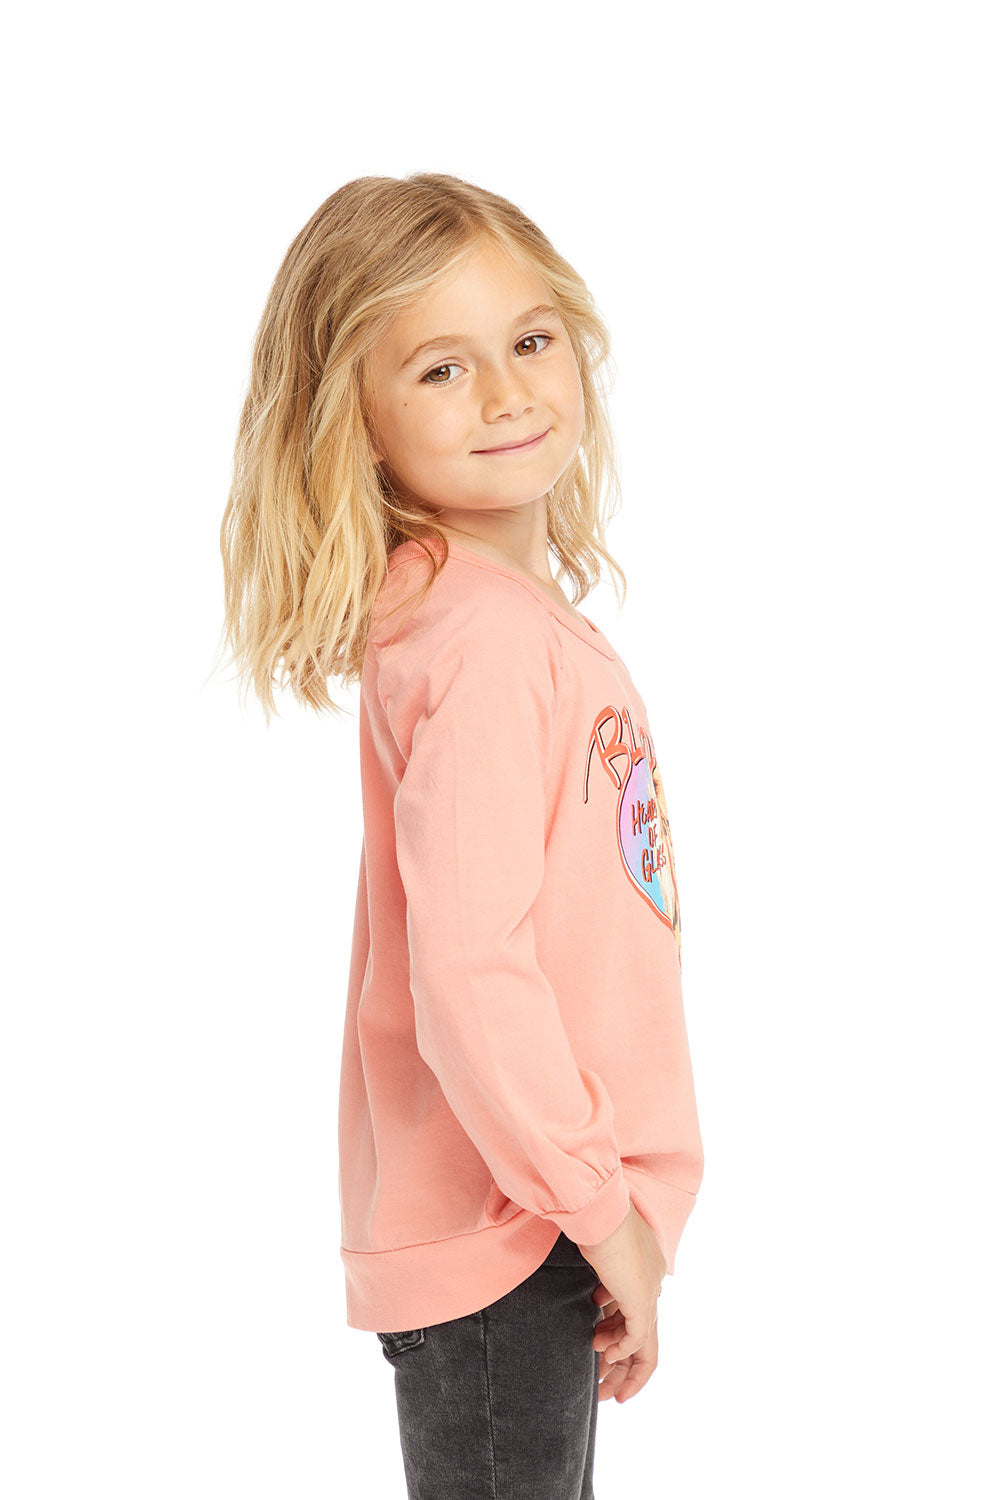 Blondie Heart Of Glass Long Sleeve GIRLS chaserbrand